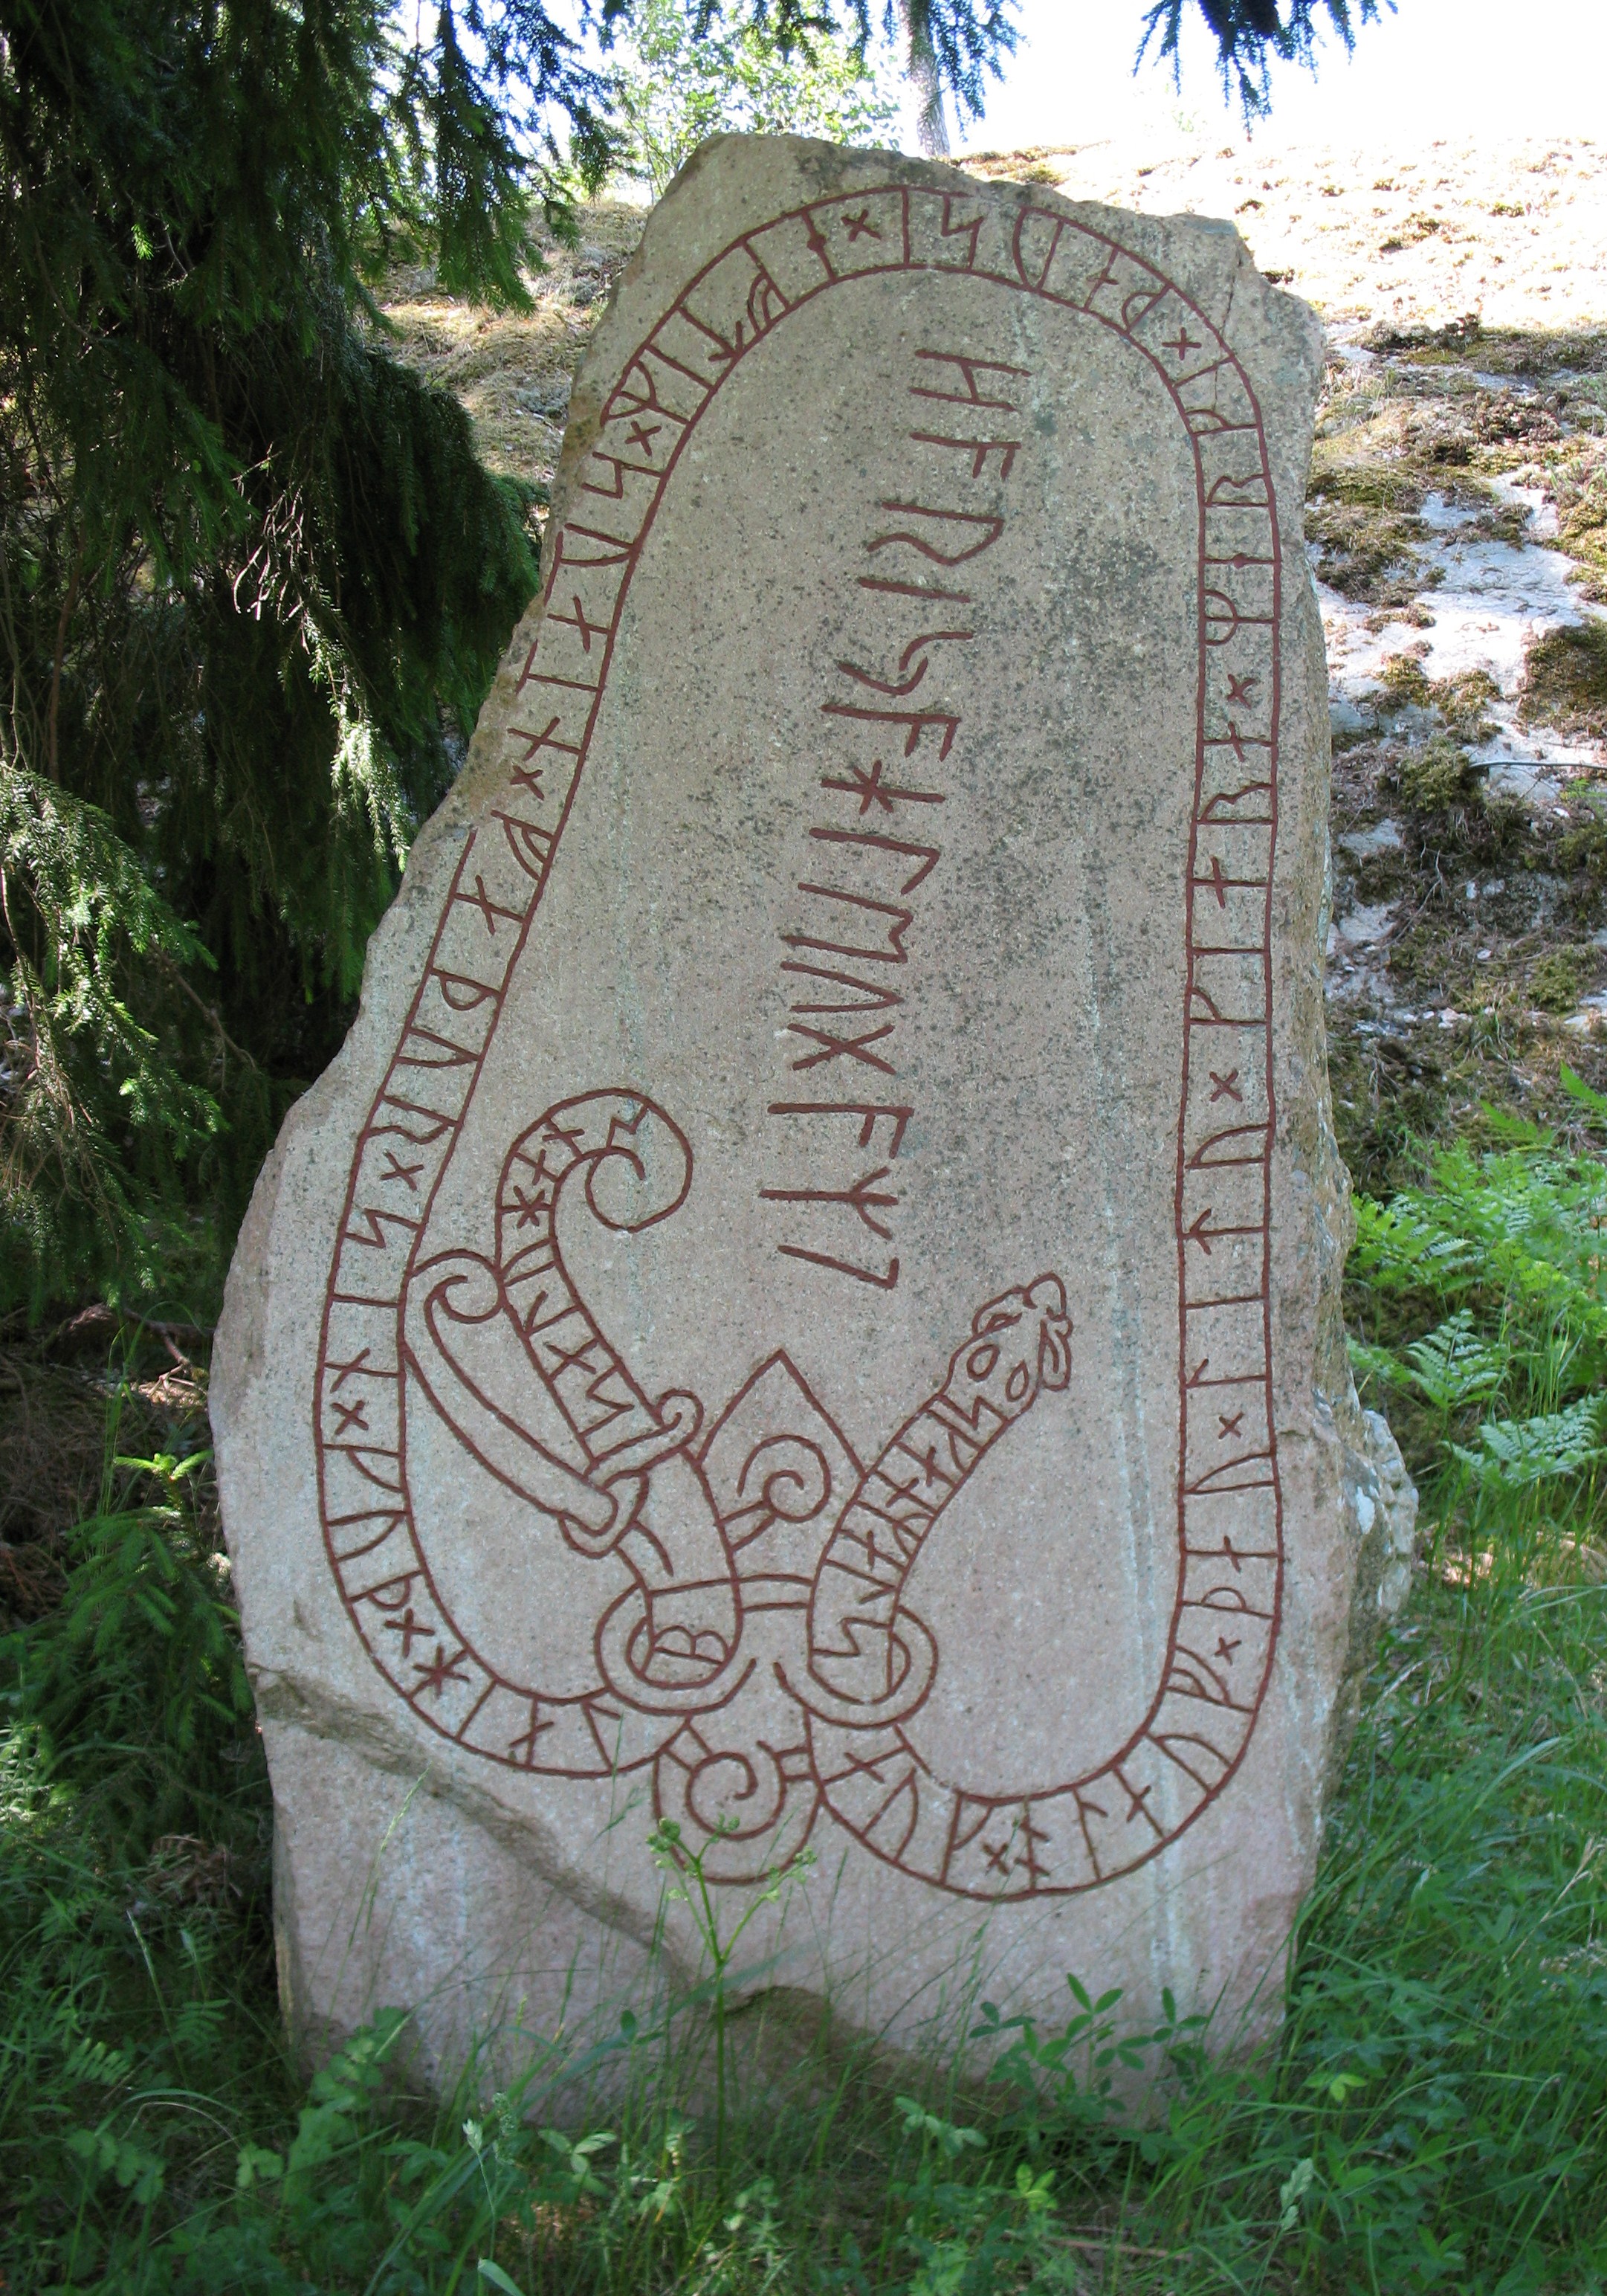 Historical Facts that ruined our perspectives - skåäng runestone - Herisfimaxfy Go Posparty \Pxdr